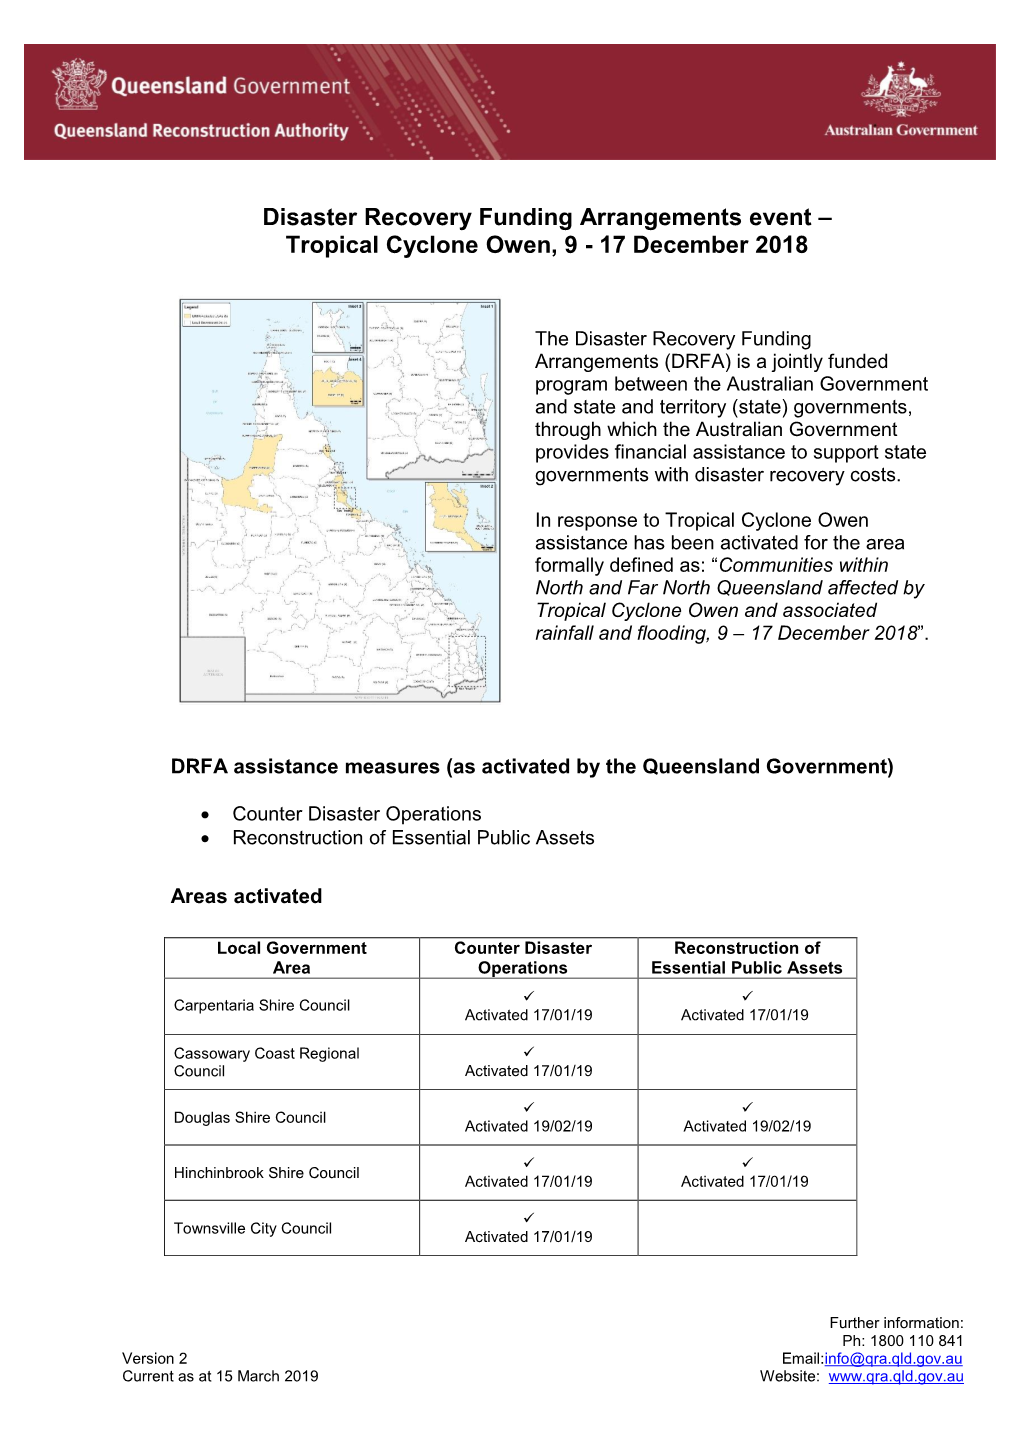 Disaster Recovery Funding Arrangements Event – Tropical Cyclone Owen, 9 - 17 December 2018